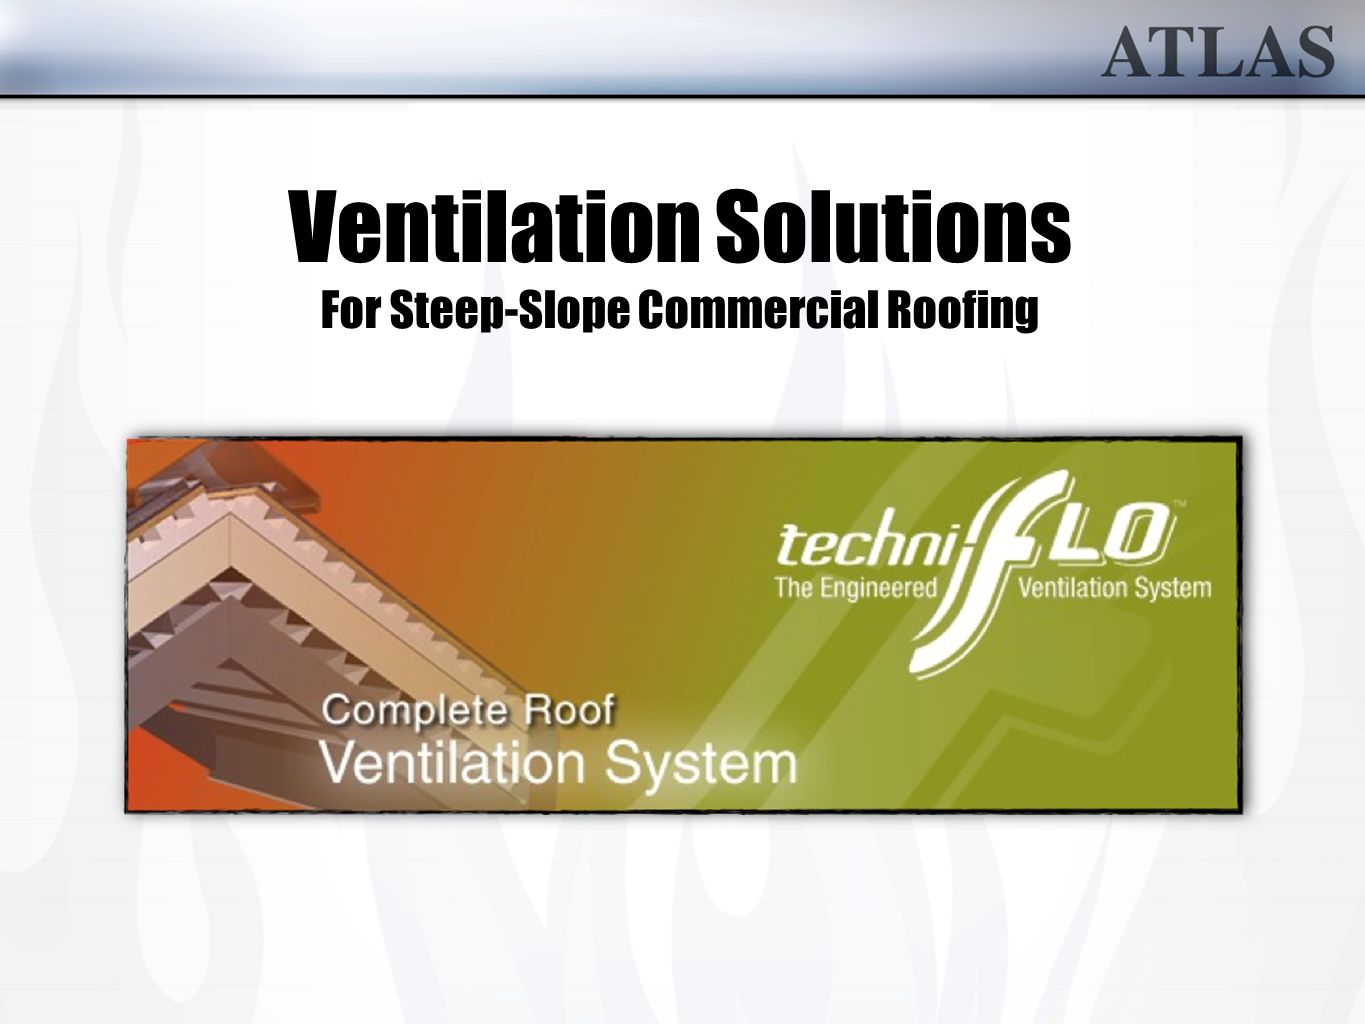 Ventilation Solutions For Steep-Slope Commercial Roofing. - ppt download